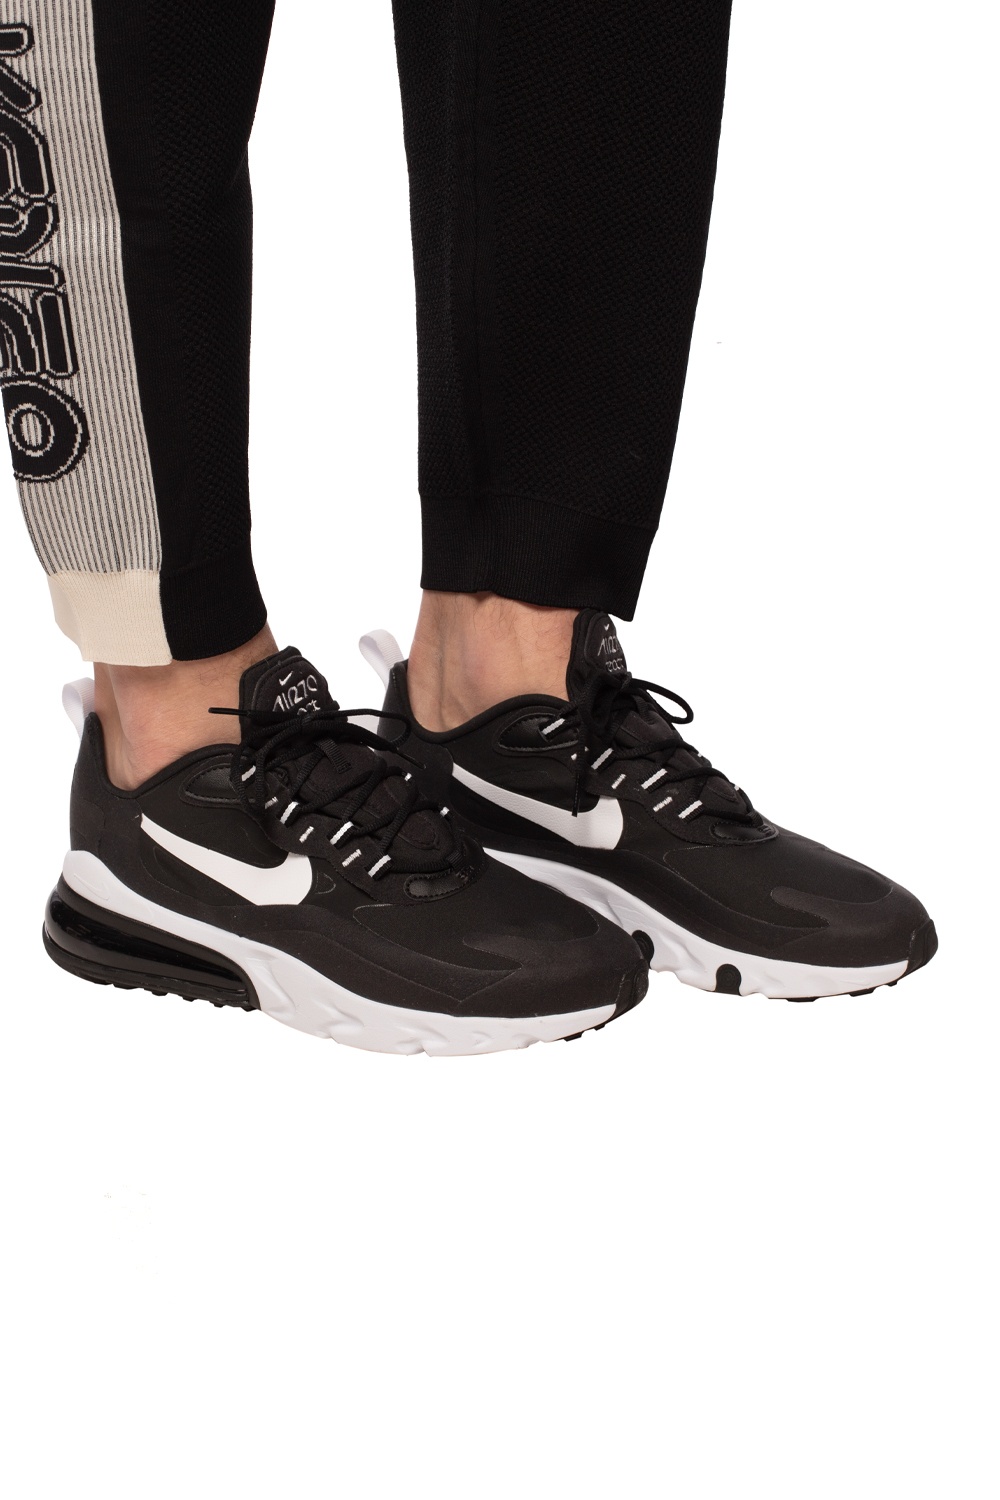 nike black and white outfit